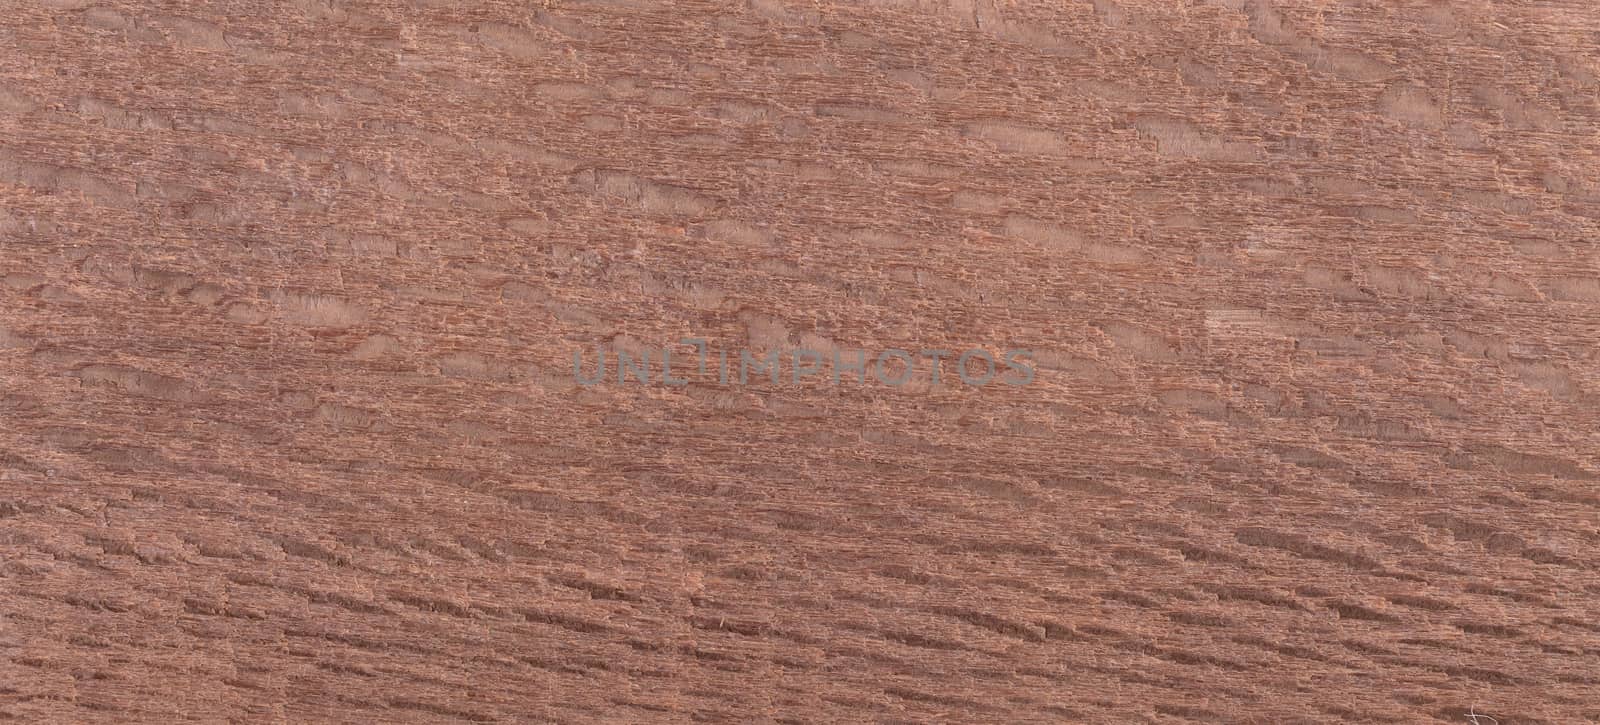 Wood background - Wood from the tropical rainforest - Suriname - Poraqueiba guianensis